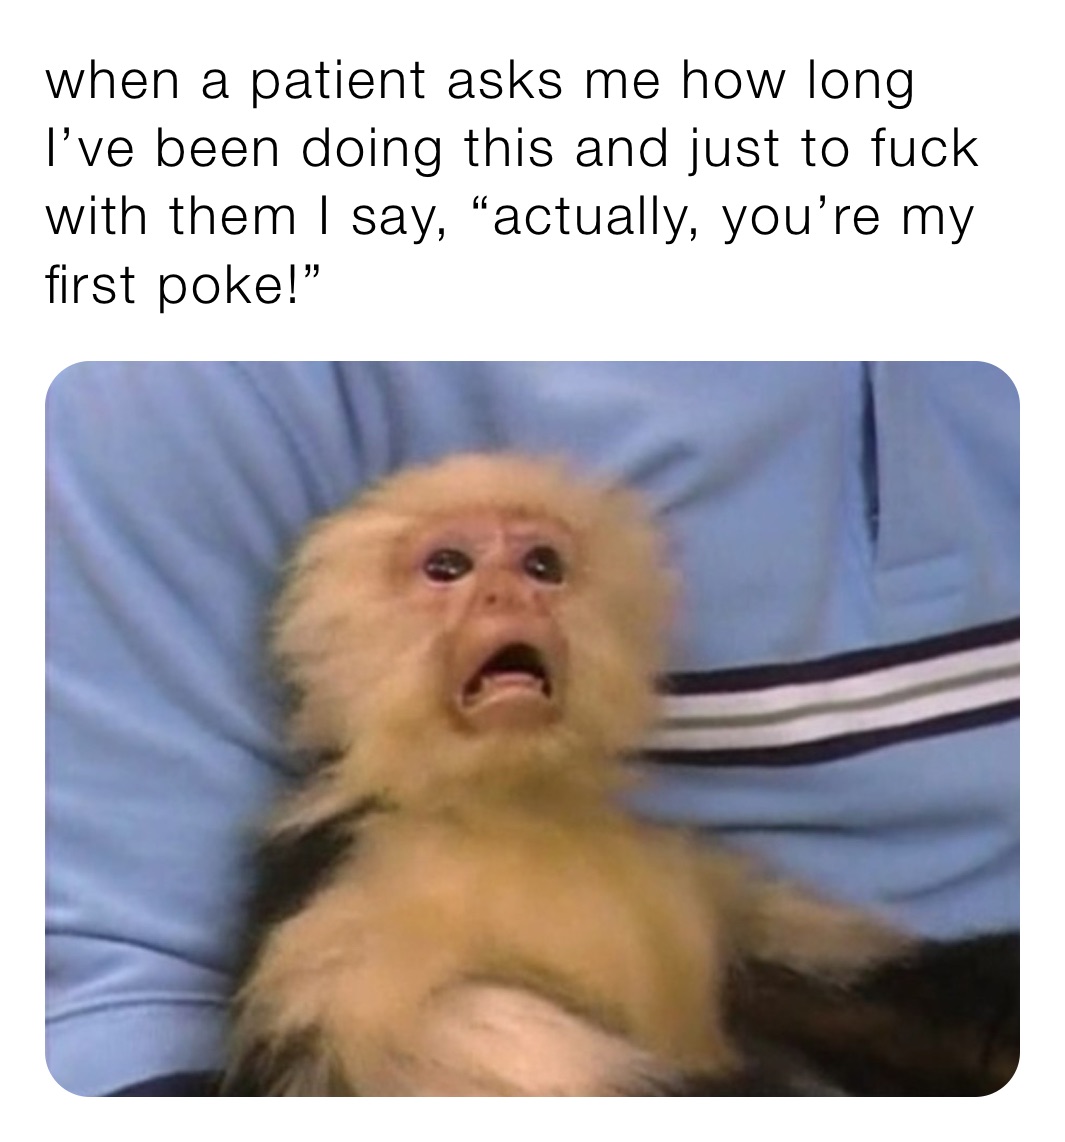 when a patient asks me how long I’ve been doing this and just to fuck with them I say, “actually, you’re my first poke!” 